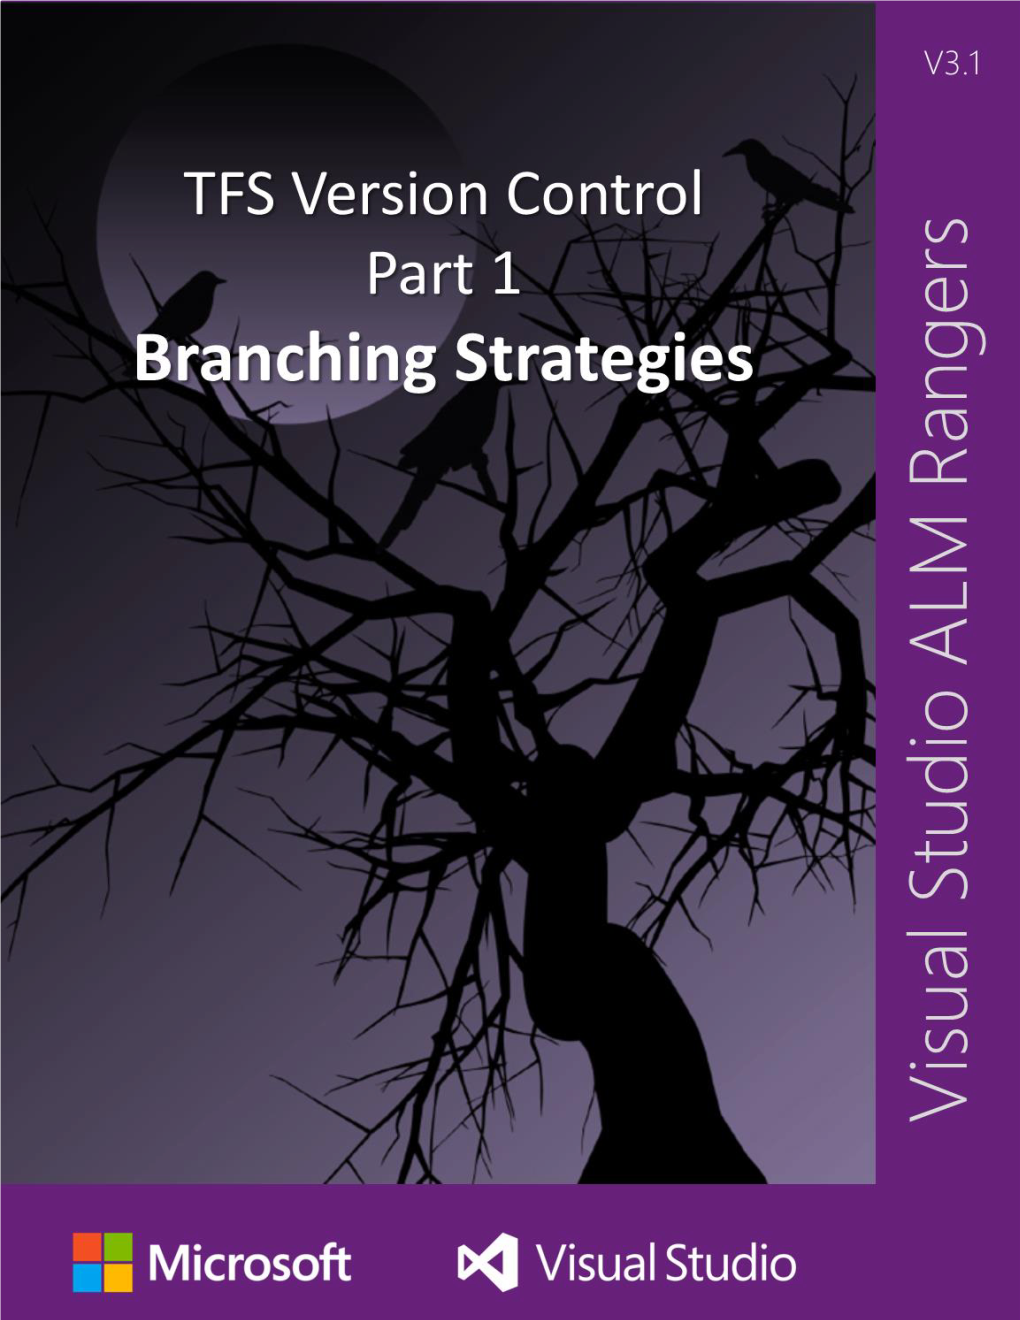 ALM Rangers Home Page – Branching Strategies – Foreword